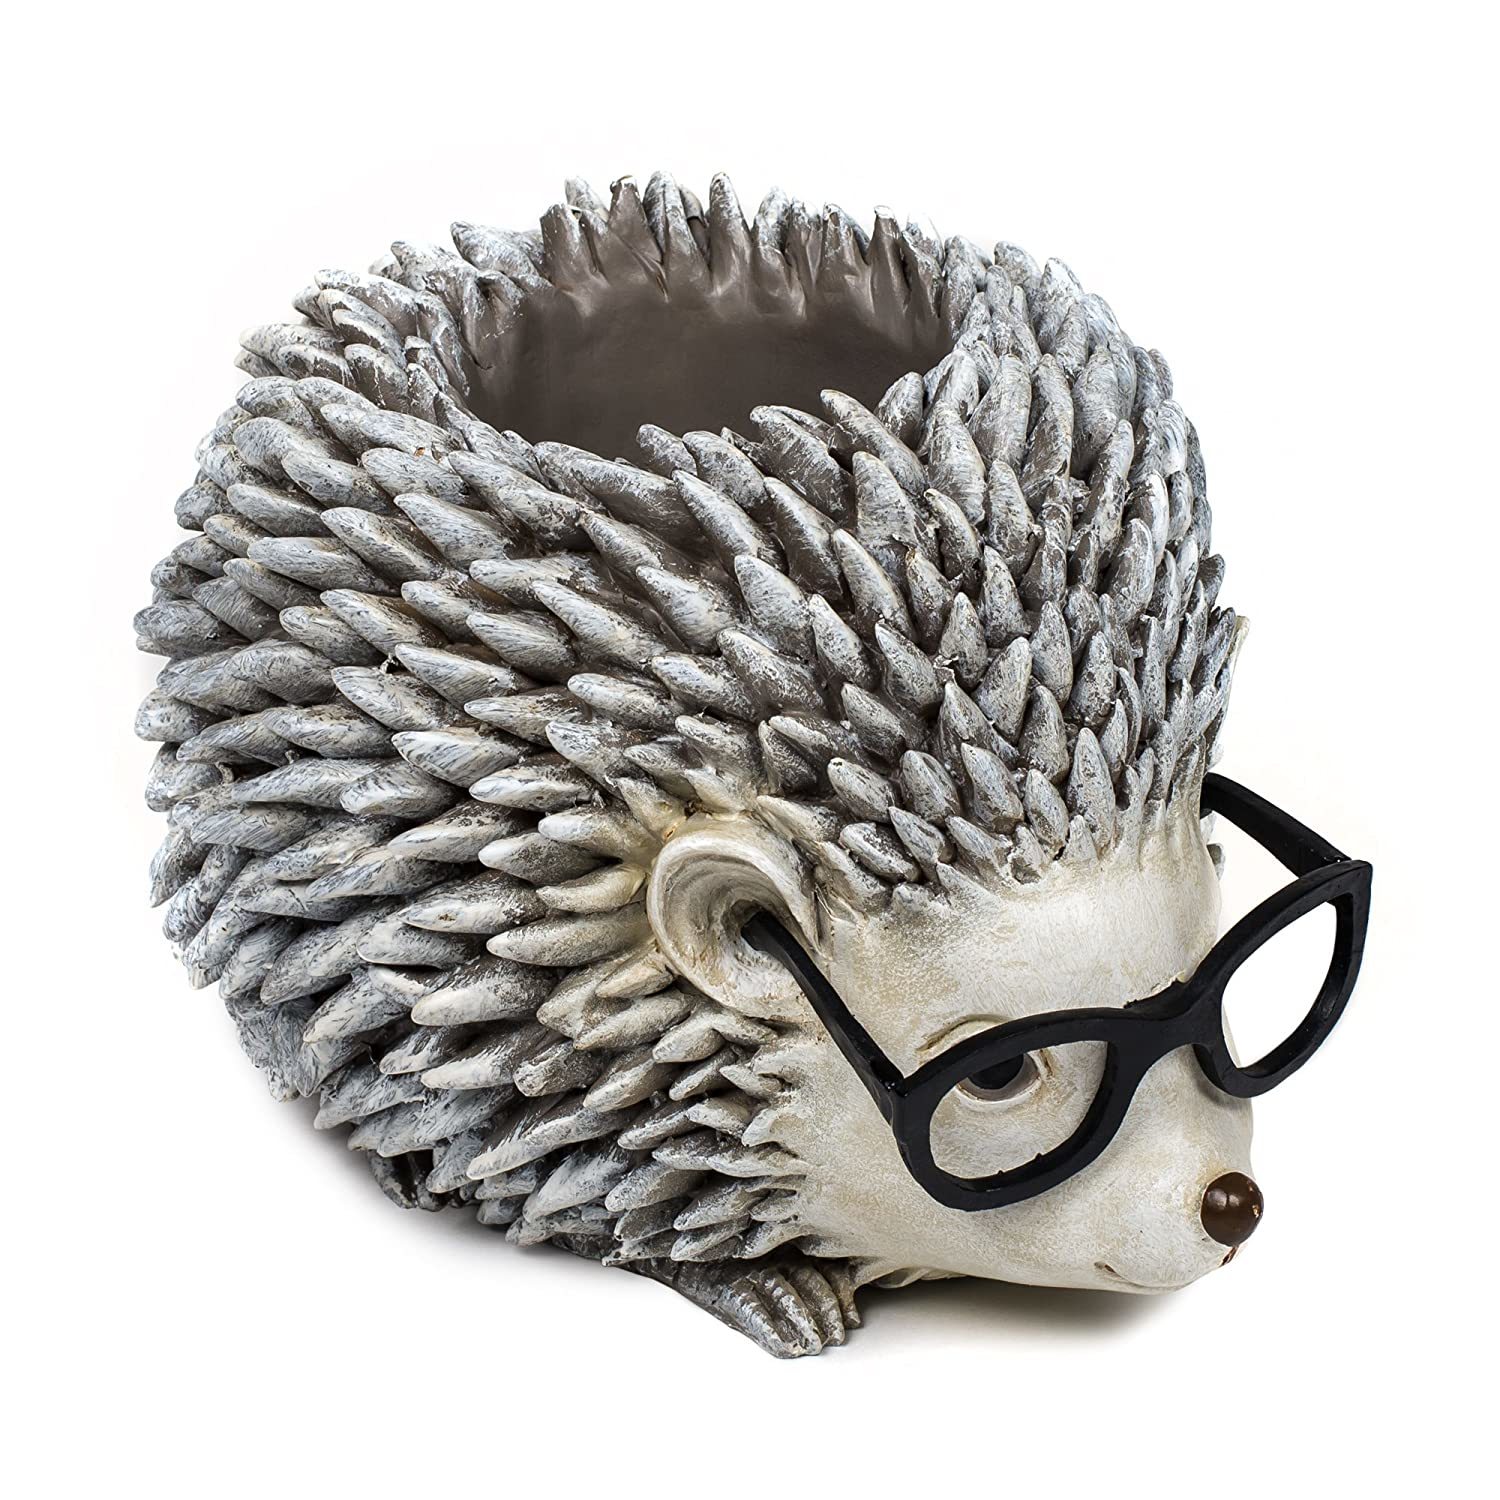 Roman Silly Spectacles Hedgehog with Glasses Planter 6.5 Inch - $63.99